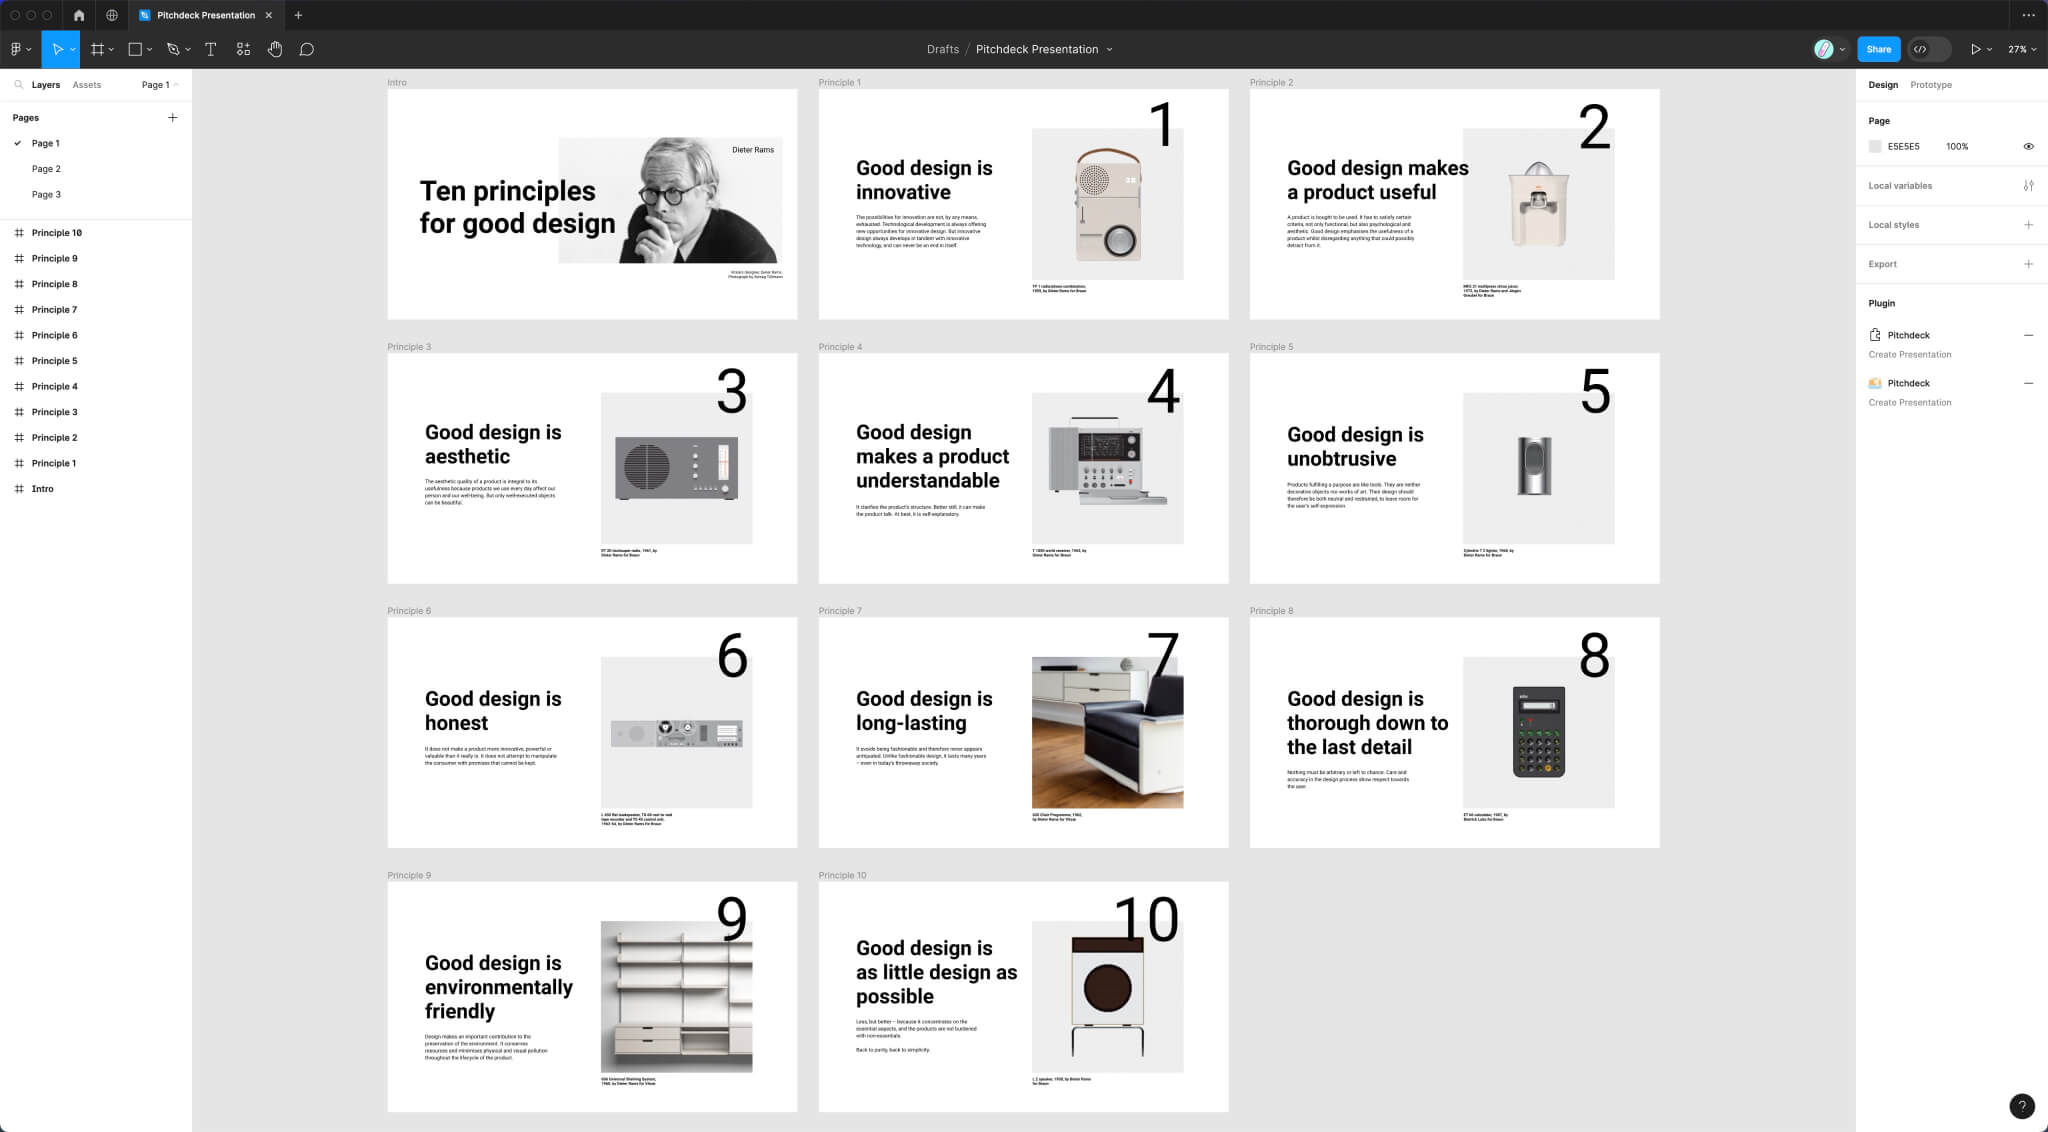 Screenshot of Pitchdeck slides from Figma